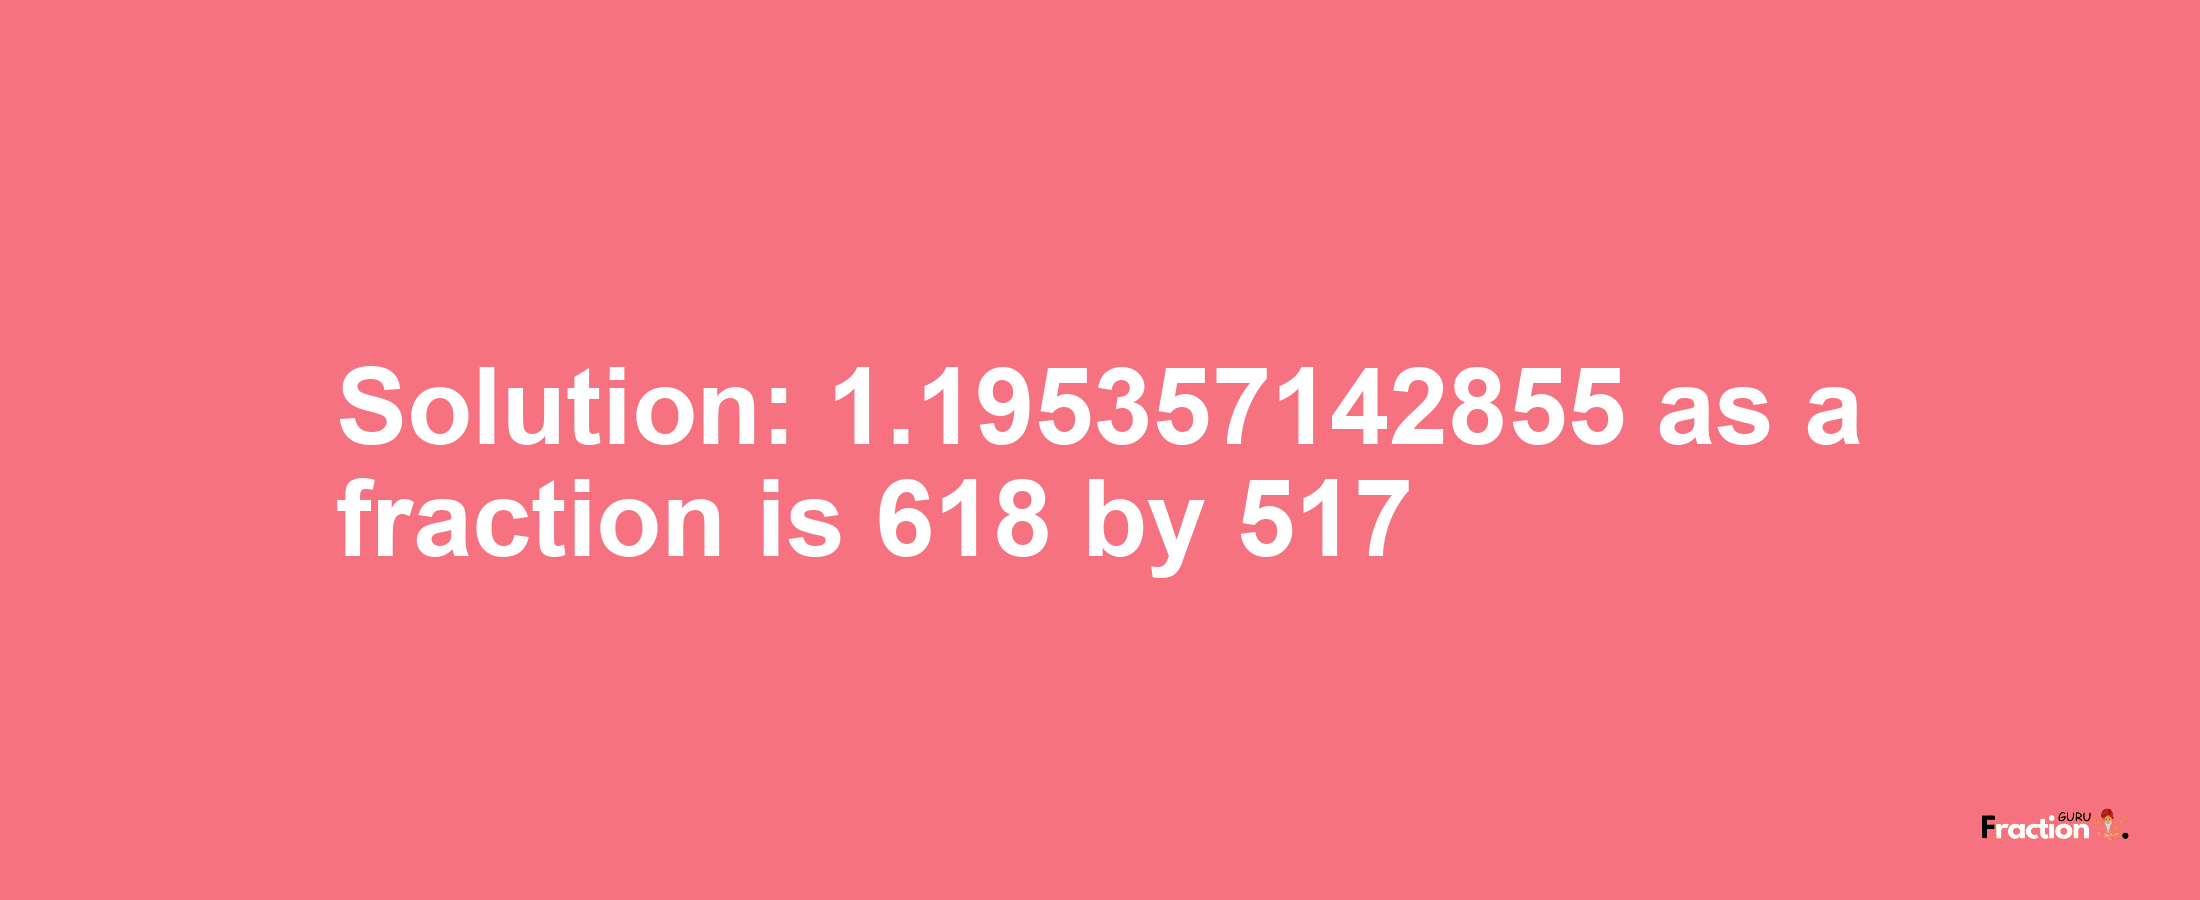 Solution:1.195357142855 as a fraction is 618/517